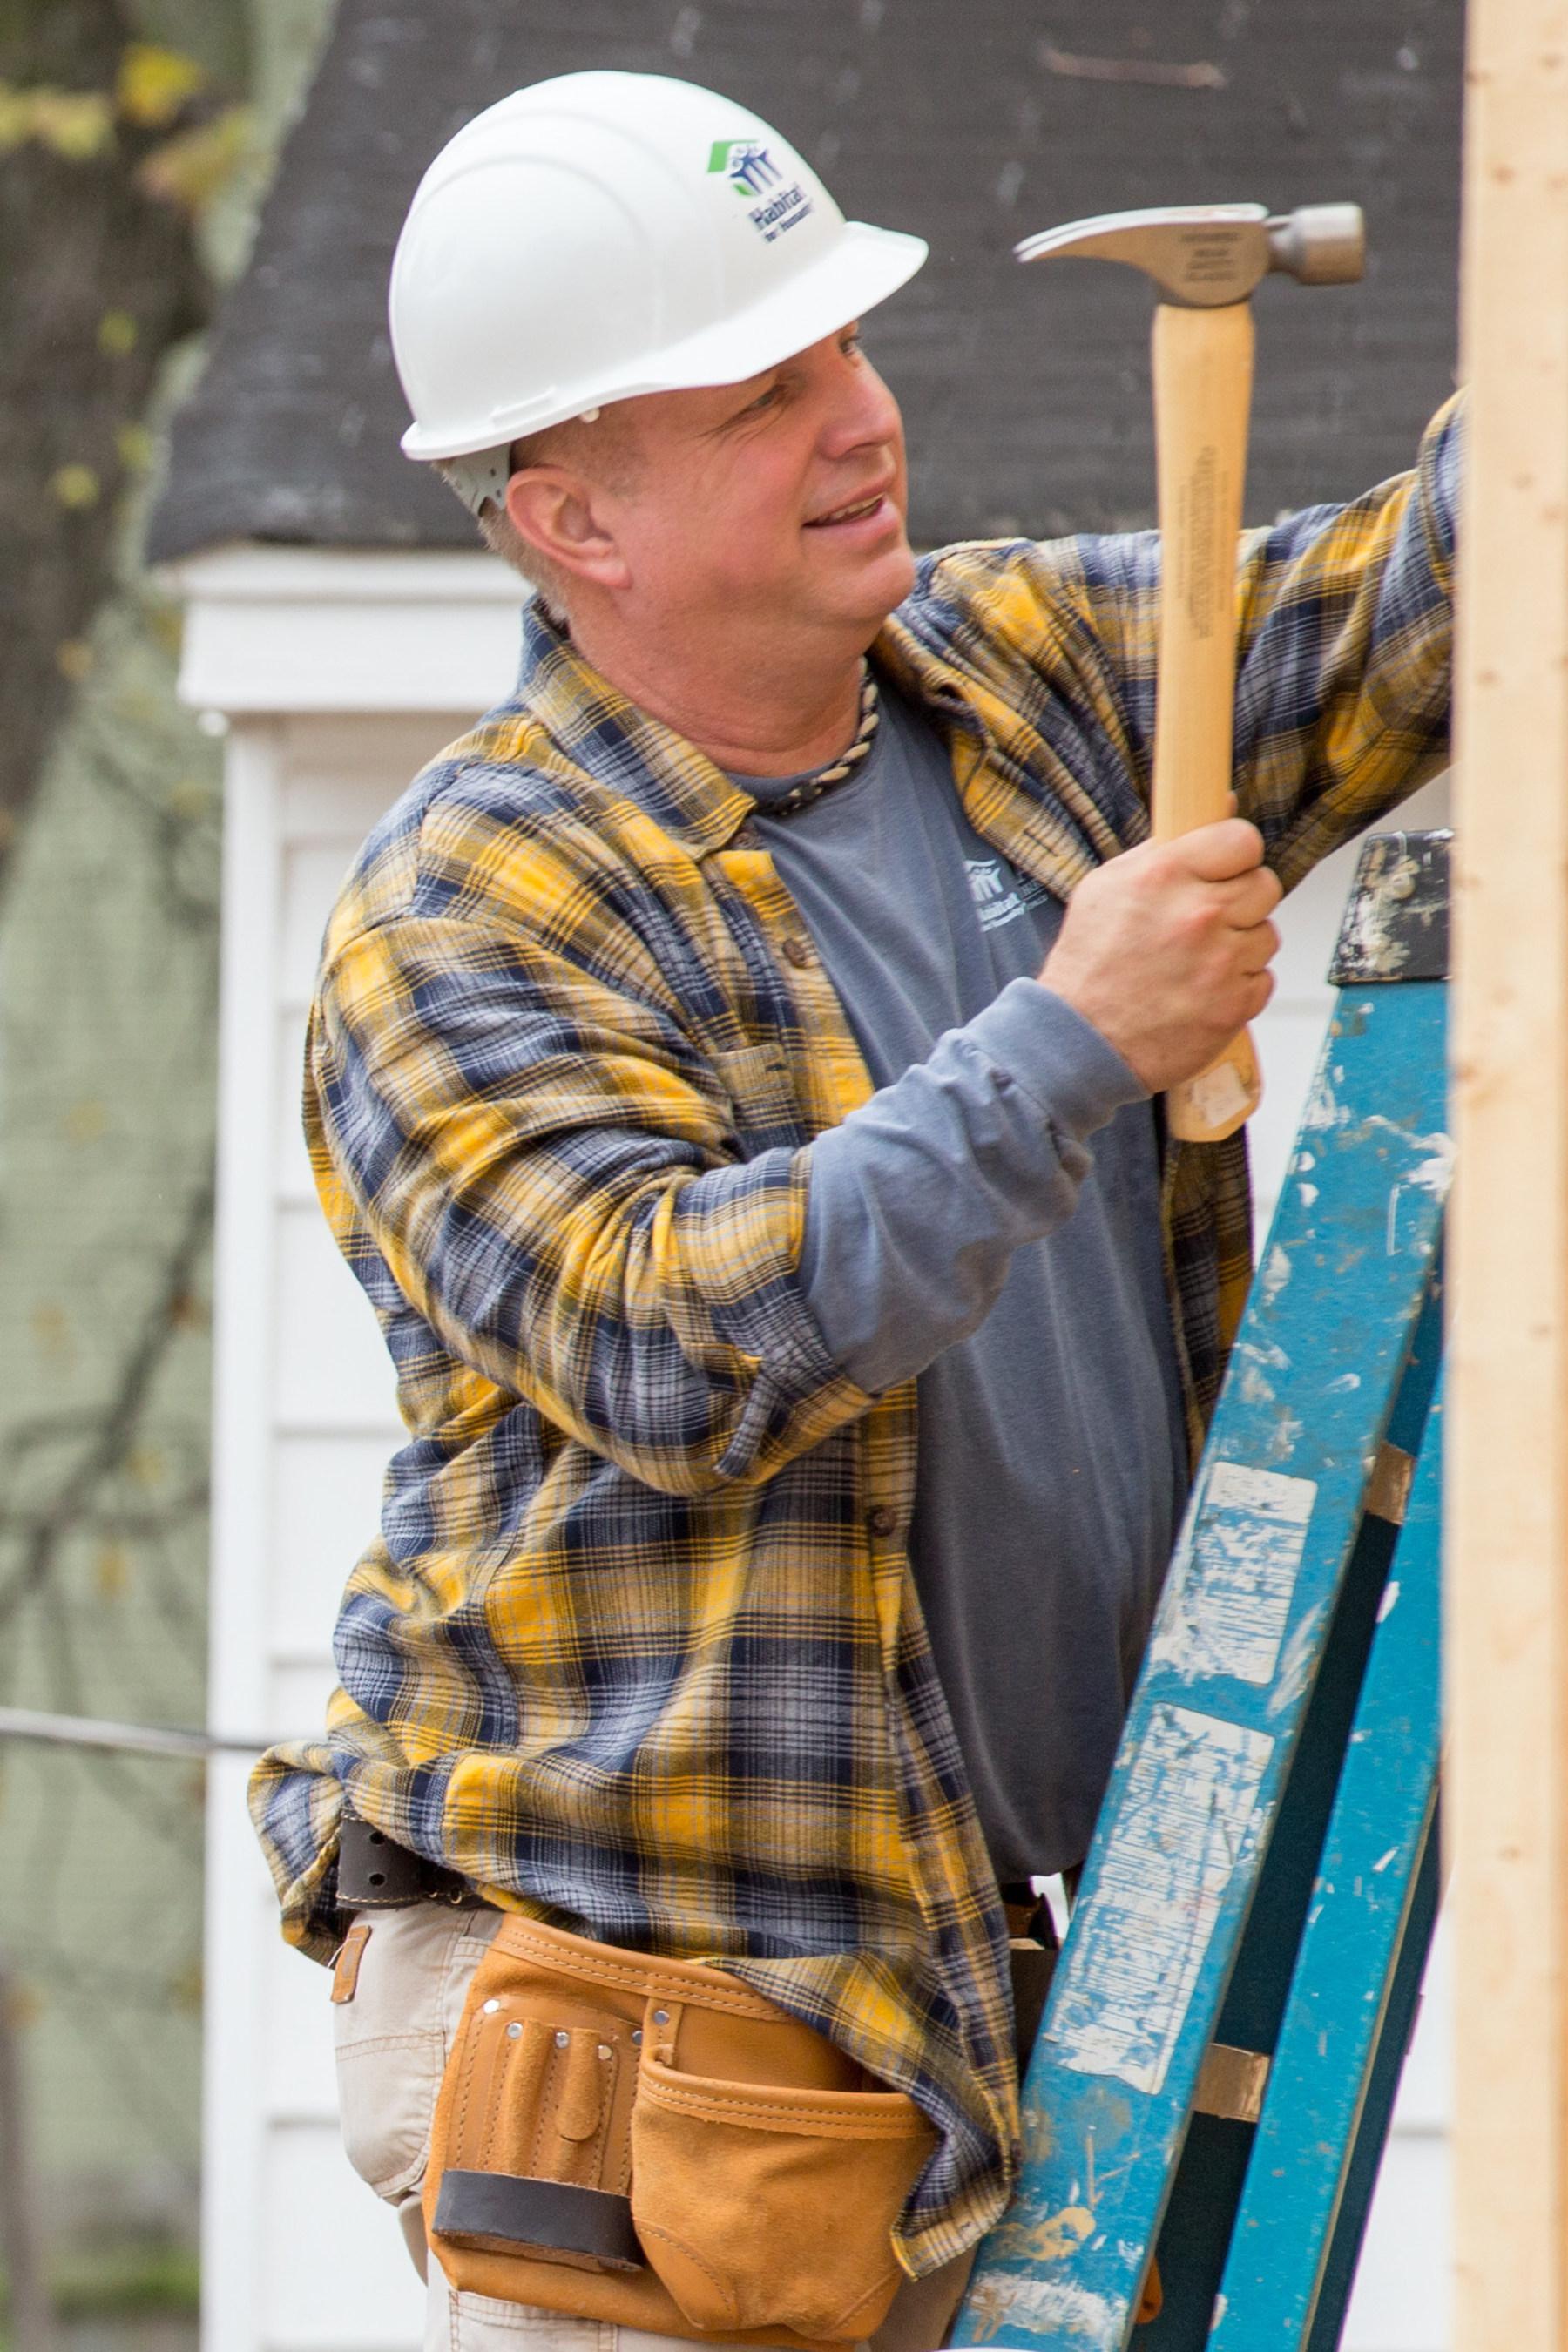 Country music stars Garth Brooks and Trisha Yearwood, along with former President Jimmy Carter and former first lady Rosalynn Carter, helped build a home today in Memphis, Tennessee, and joined Habitat for Humanity in announcing its 33rd Carter Work Project, which will take place in the city's Uptown neighborhood, Aug. 21-27, 2016.